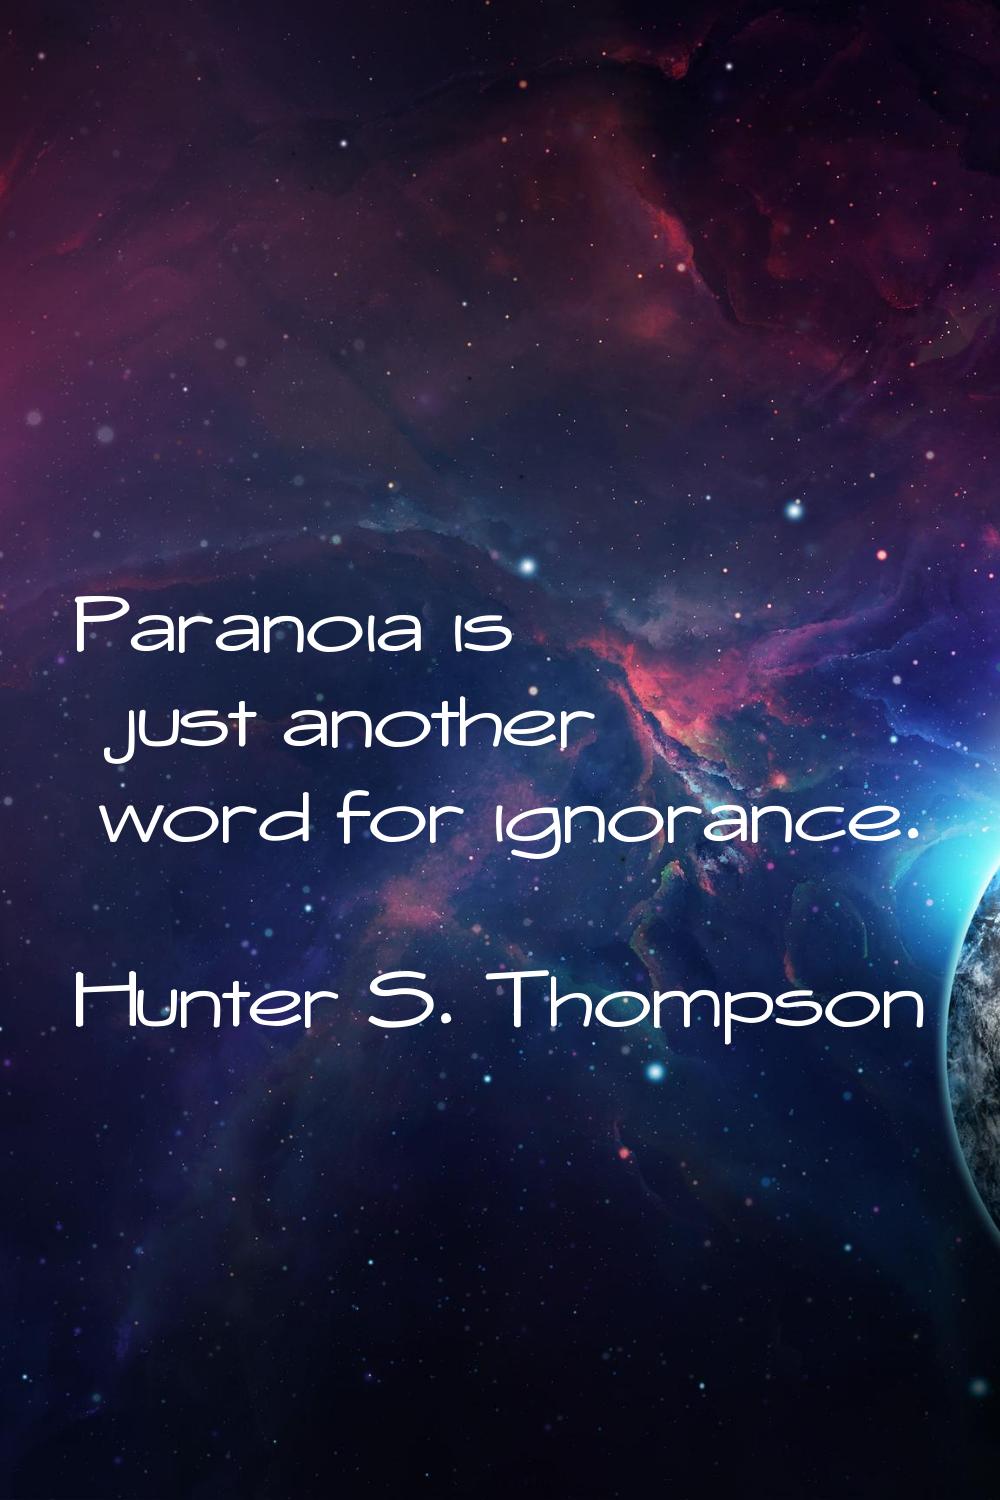 Paranoia is just another word for ignorance.